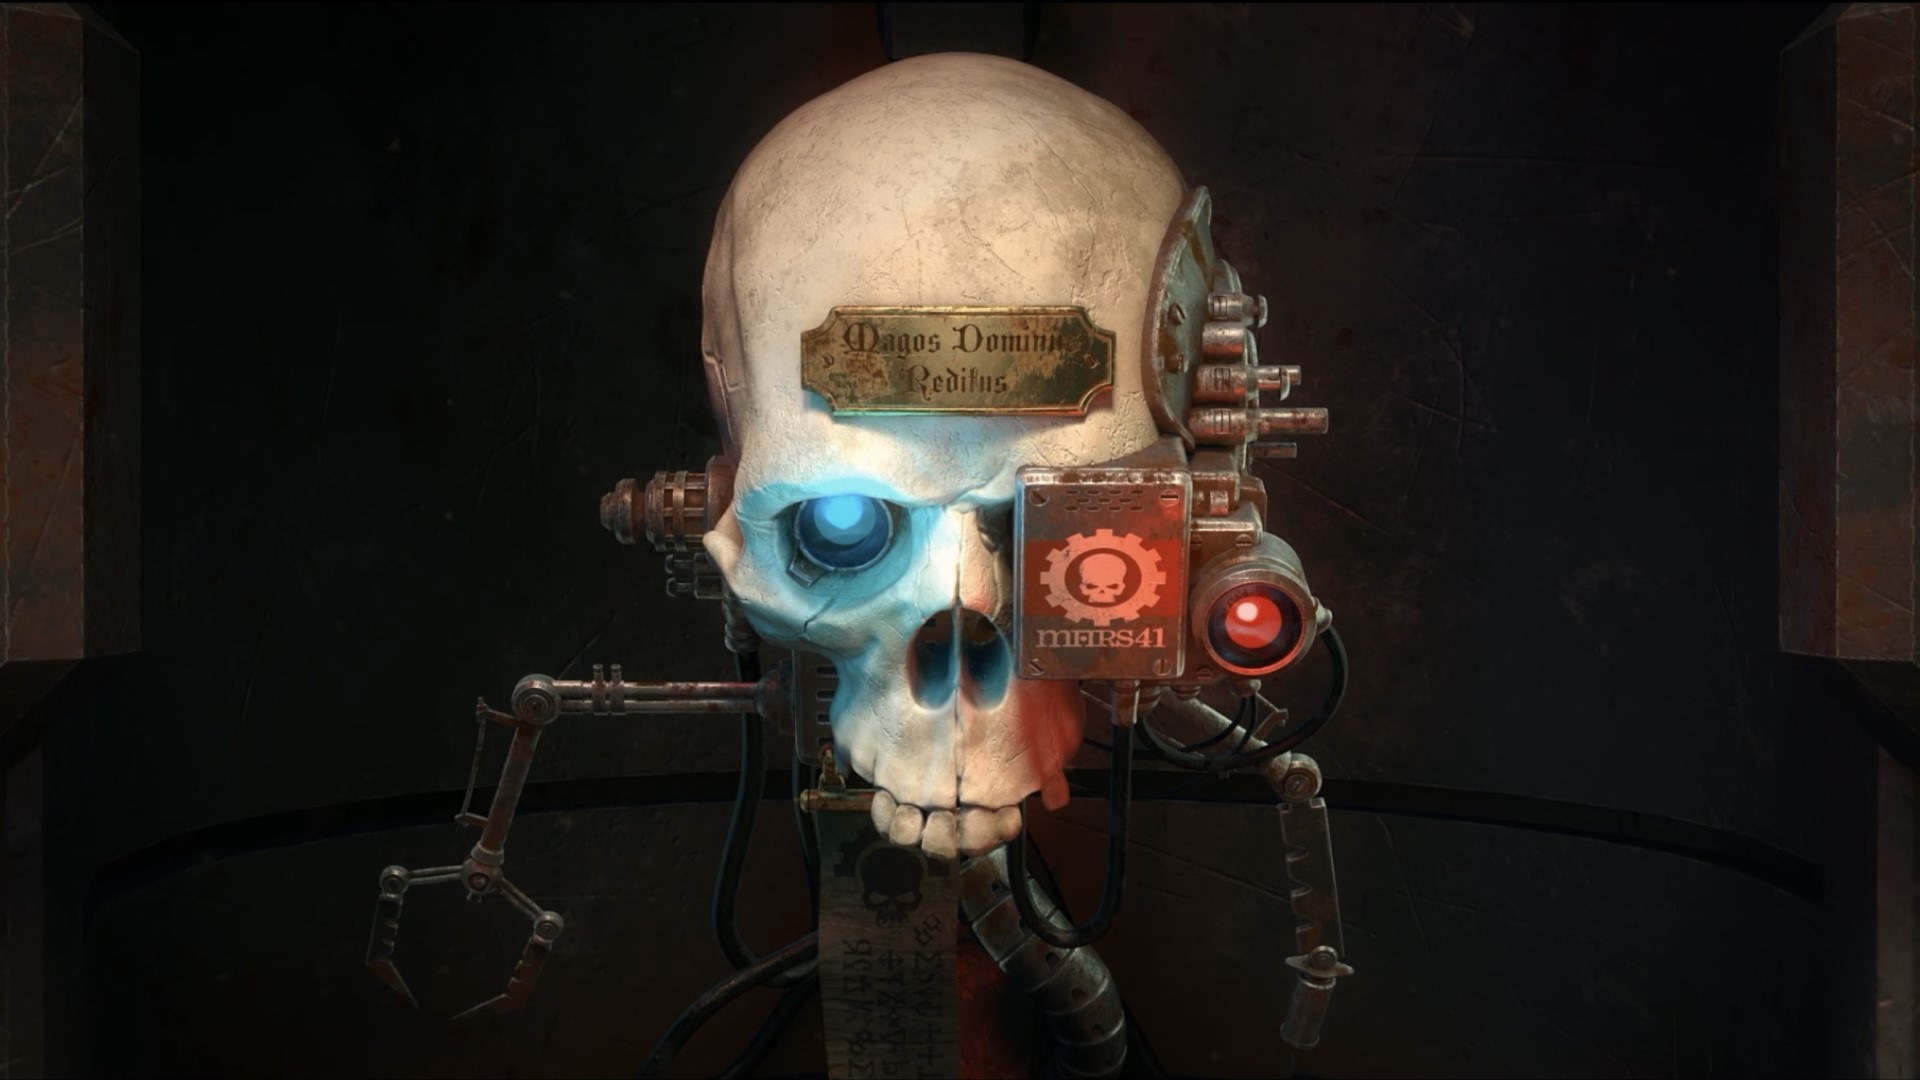 Our Warhammer 40k: Mechanicus giveaway has ended